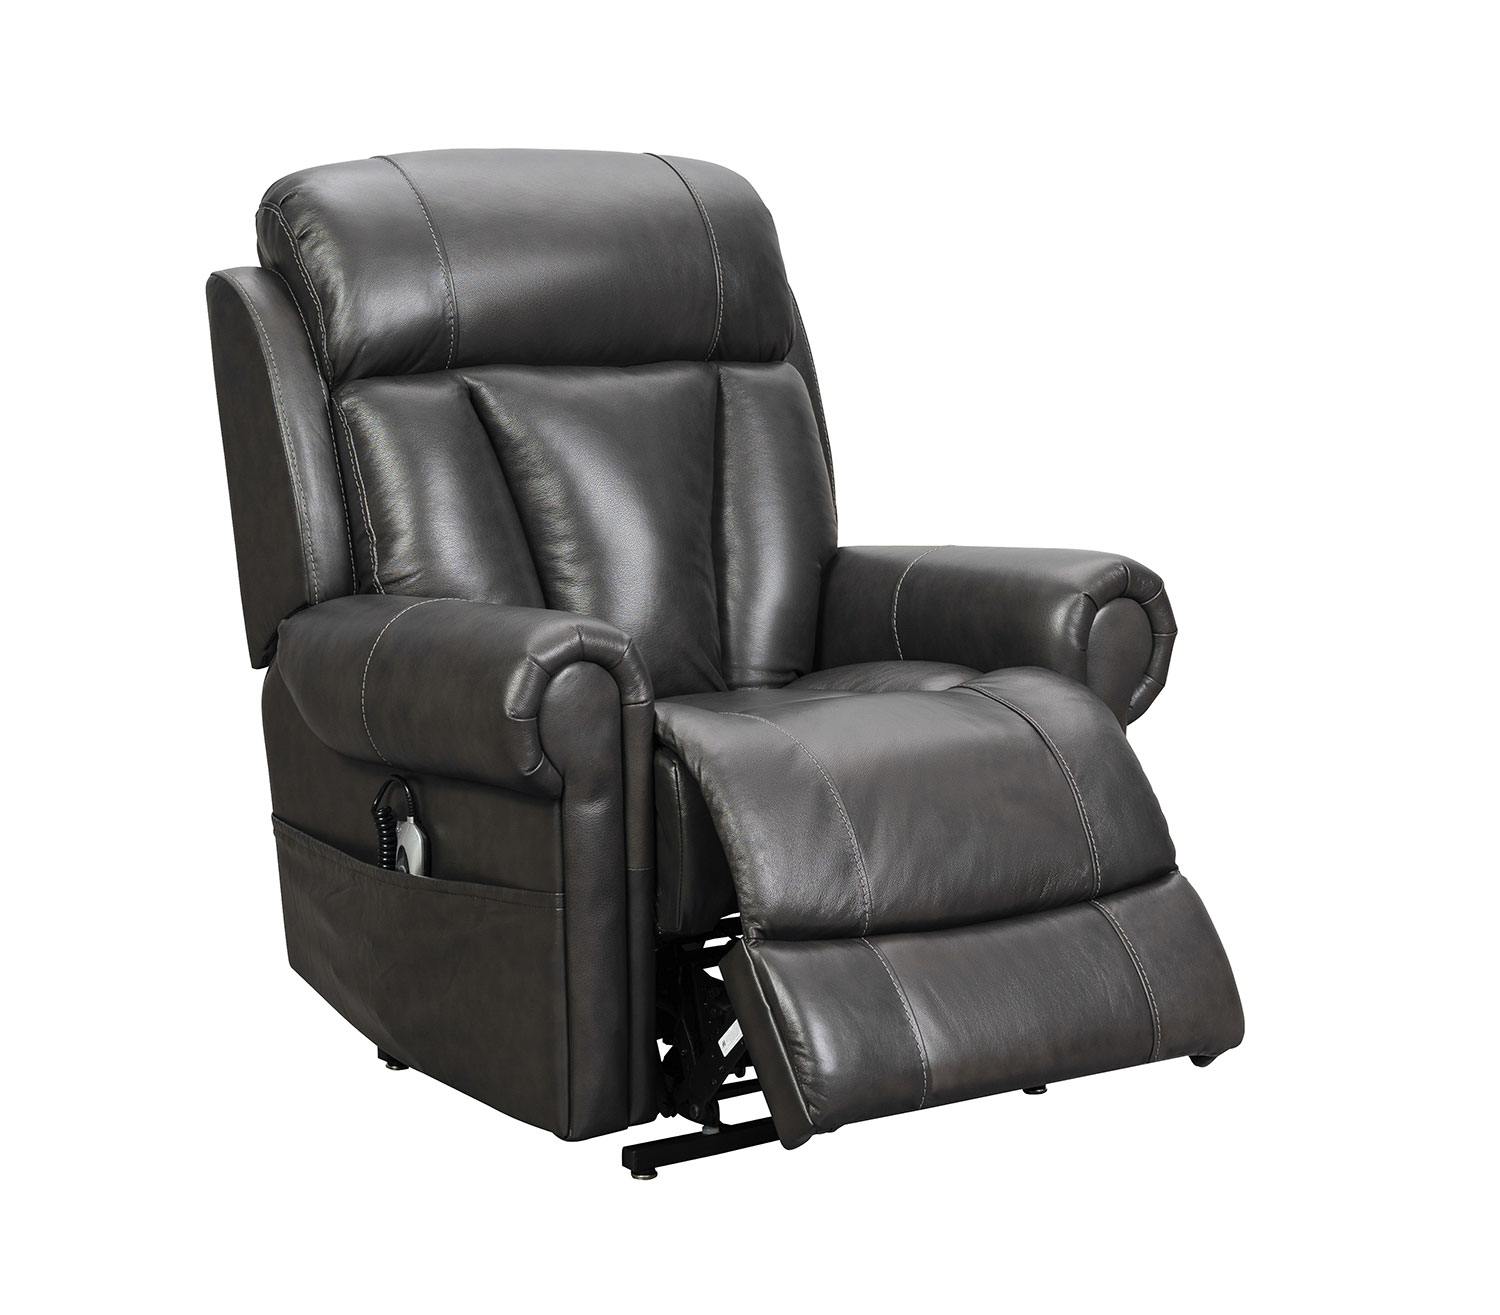 Barcalounger Lyndon Lift Chair Recliner with Power Head Rest and Lumbar - Venzia Grey/Leather Match